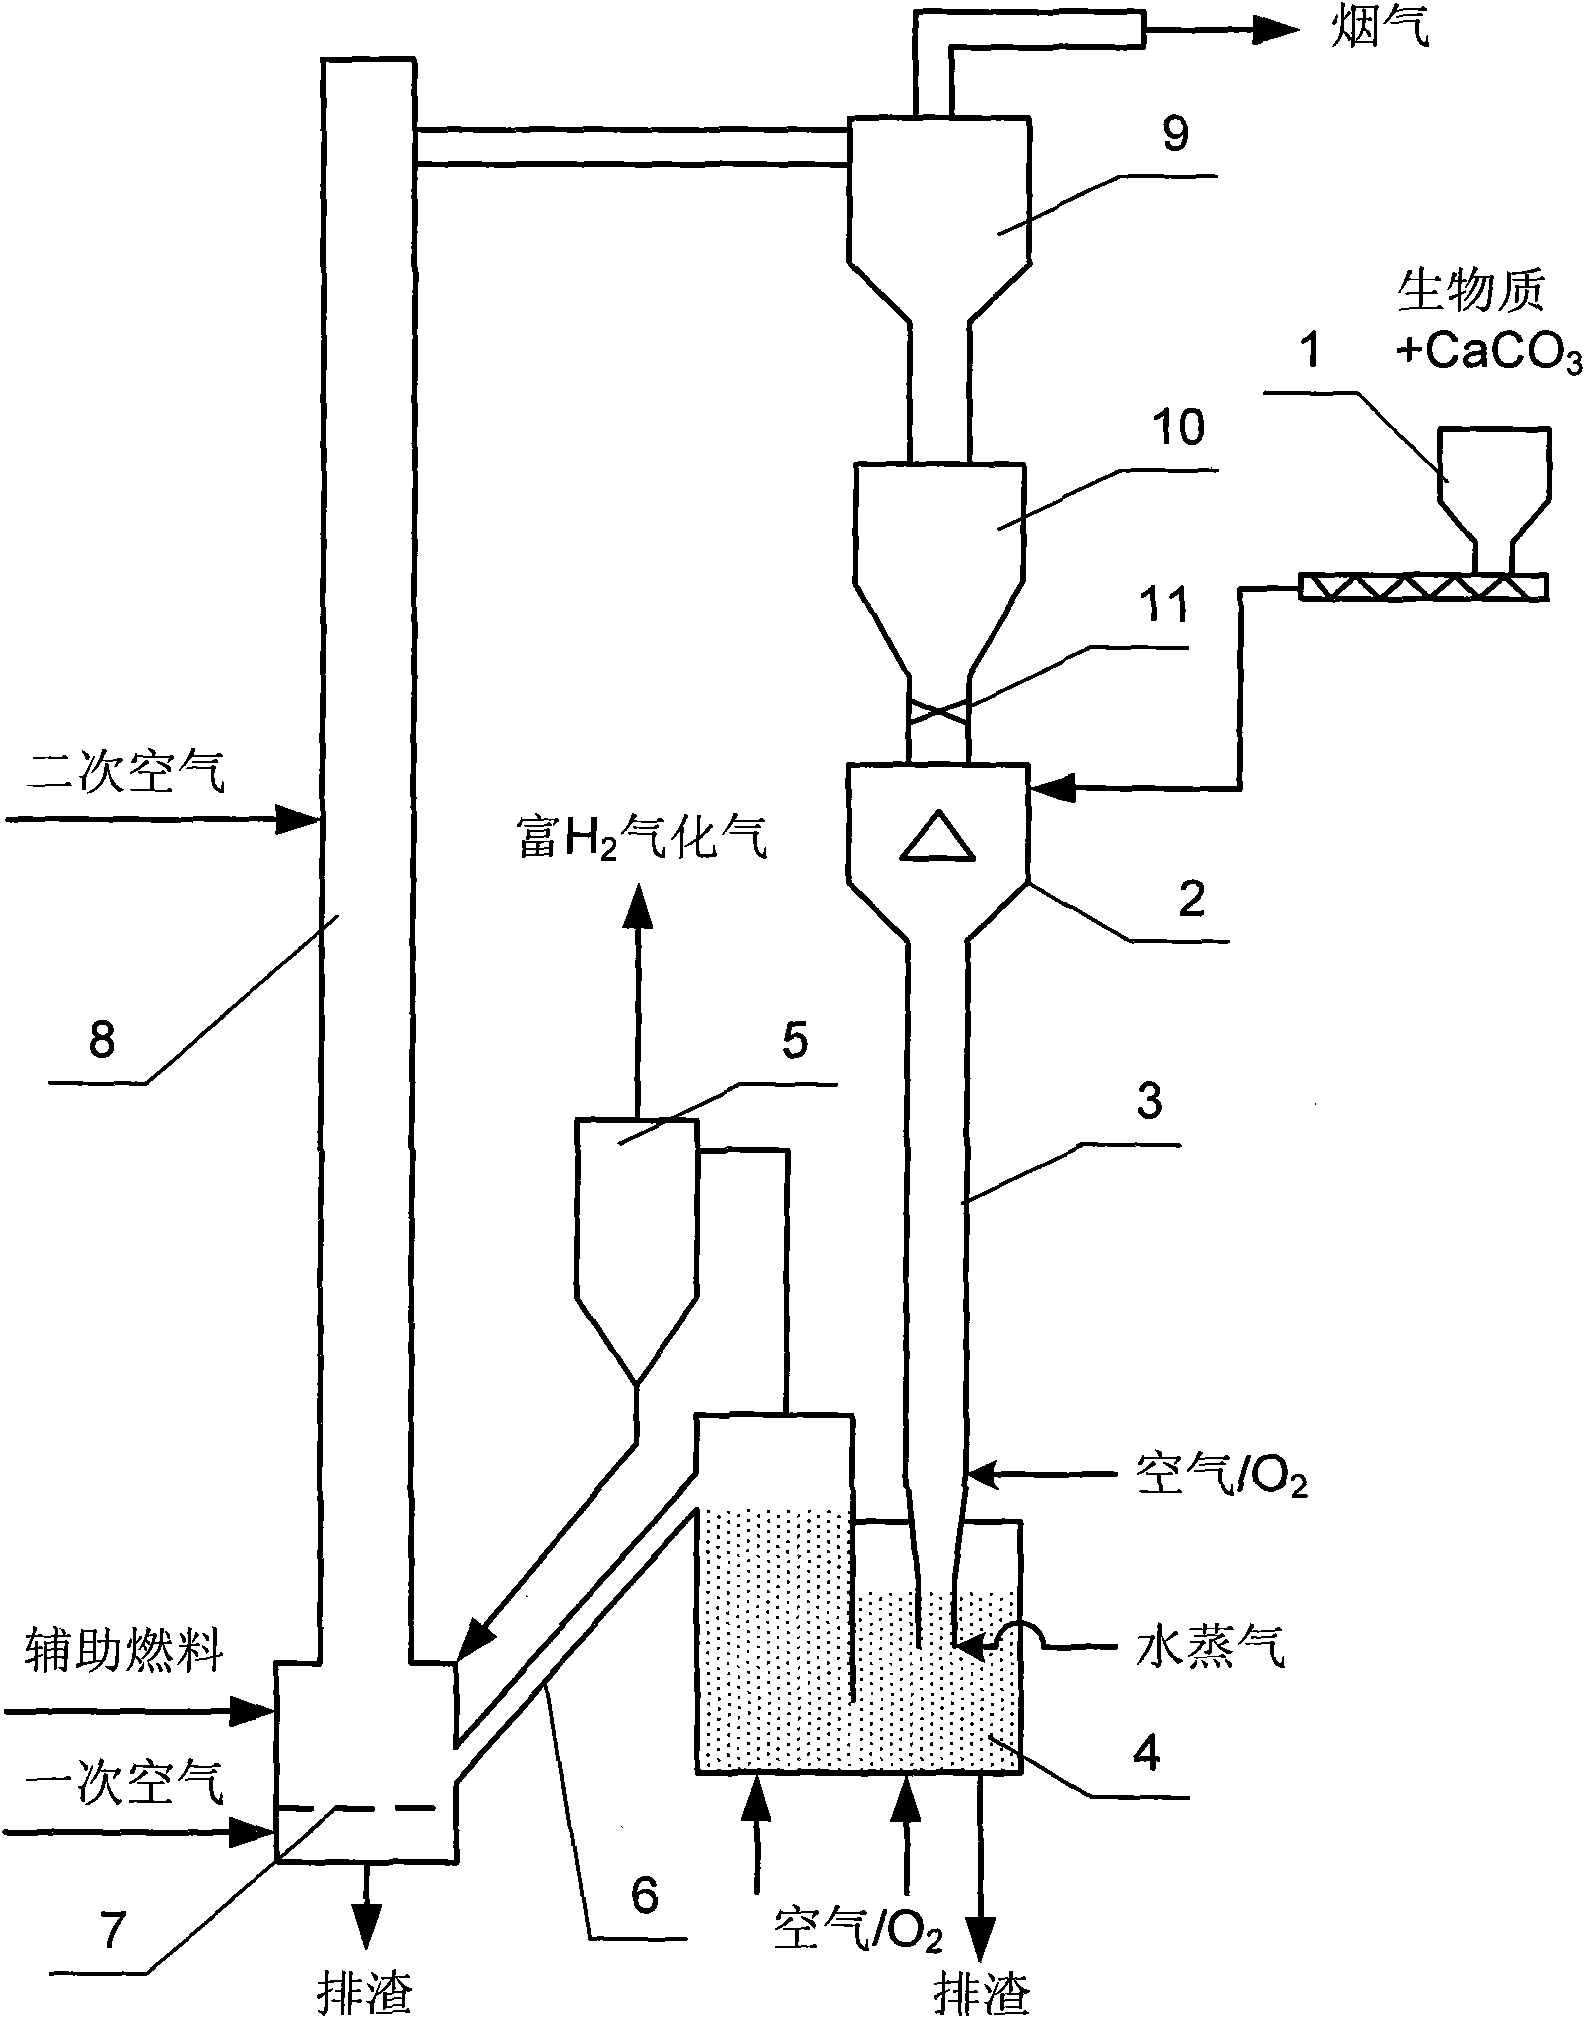 Gasification device and method for preparing hydrogen-rich synthetic gas from biomass